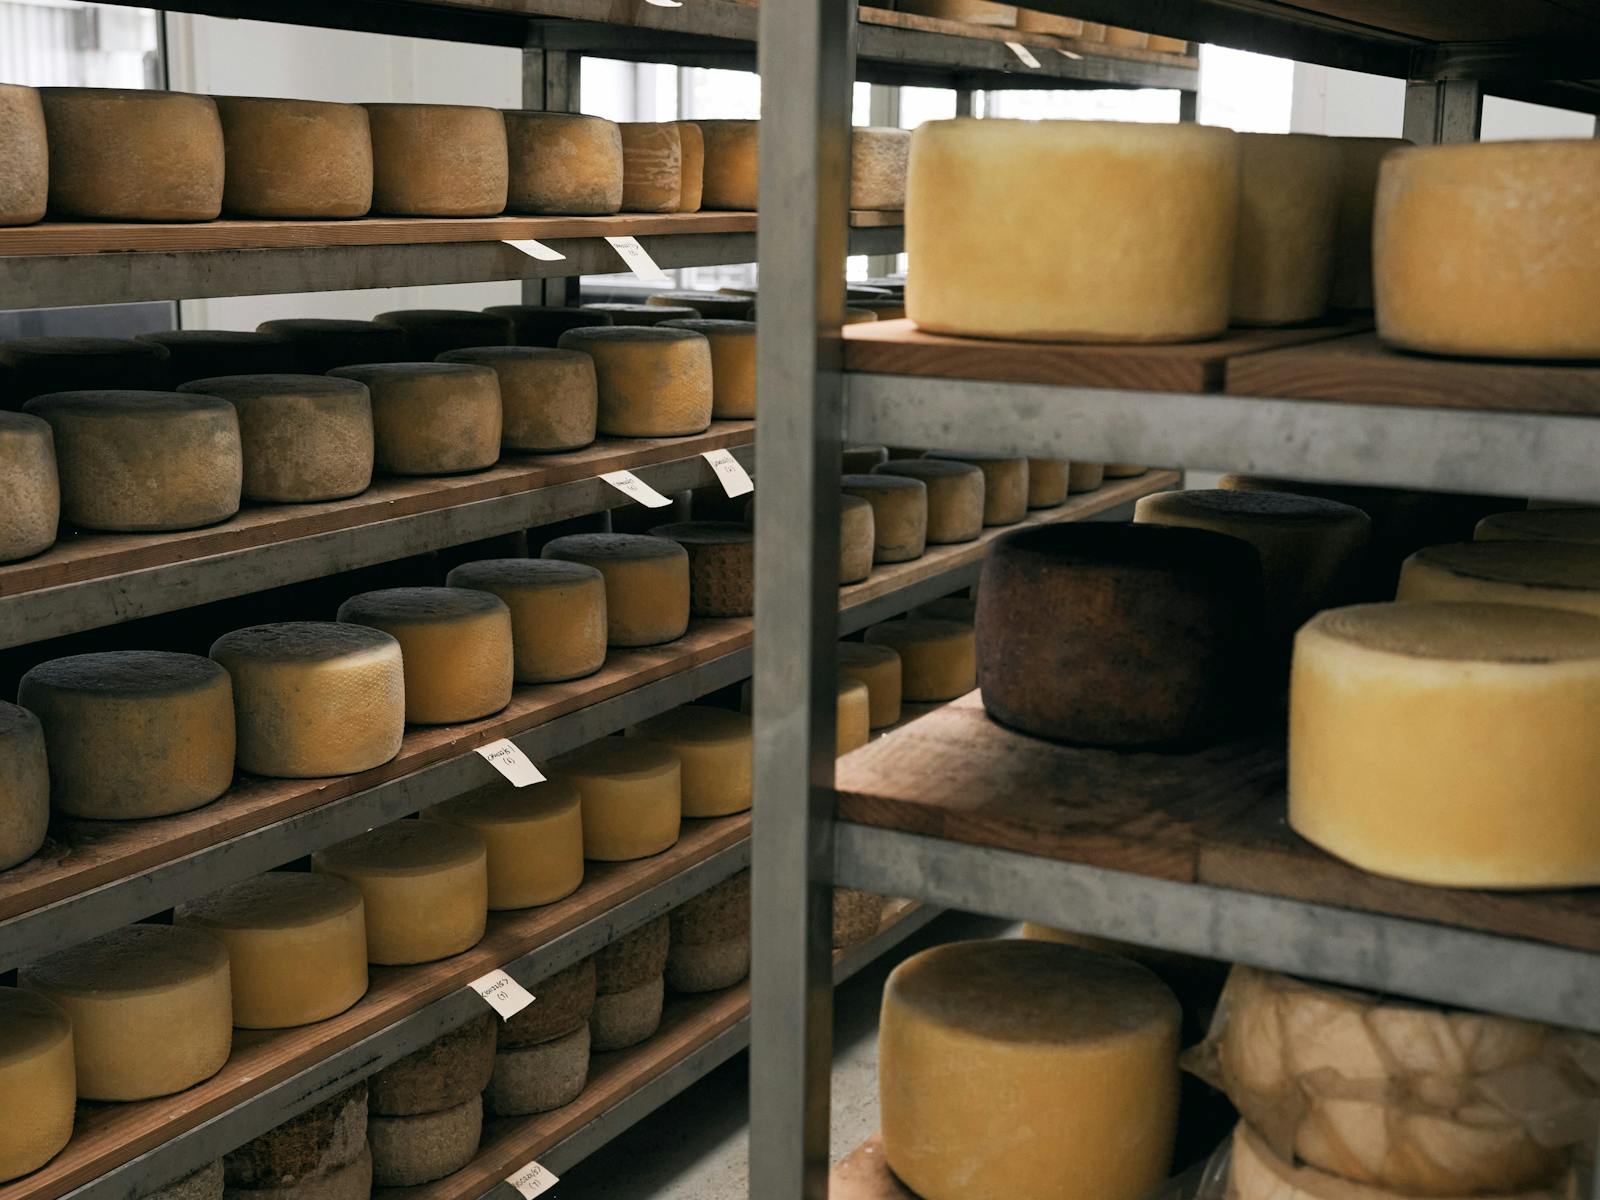 Shelving filled with a variety of handmade cheeses.